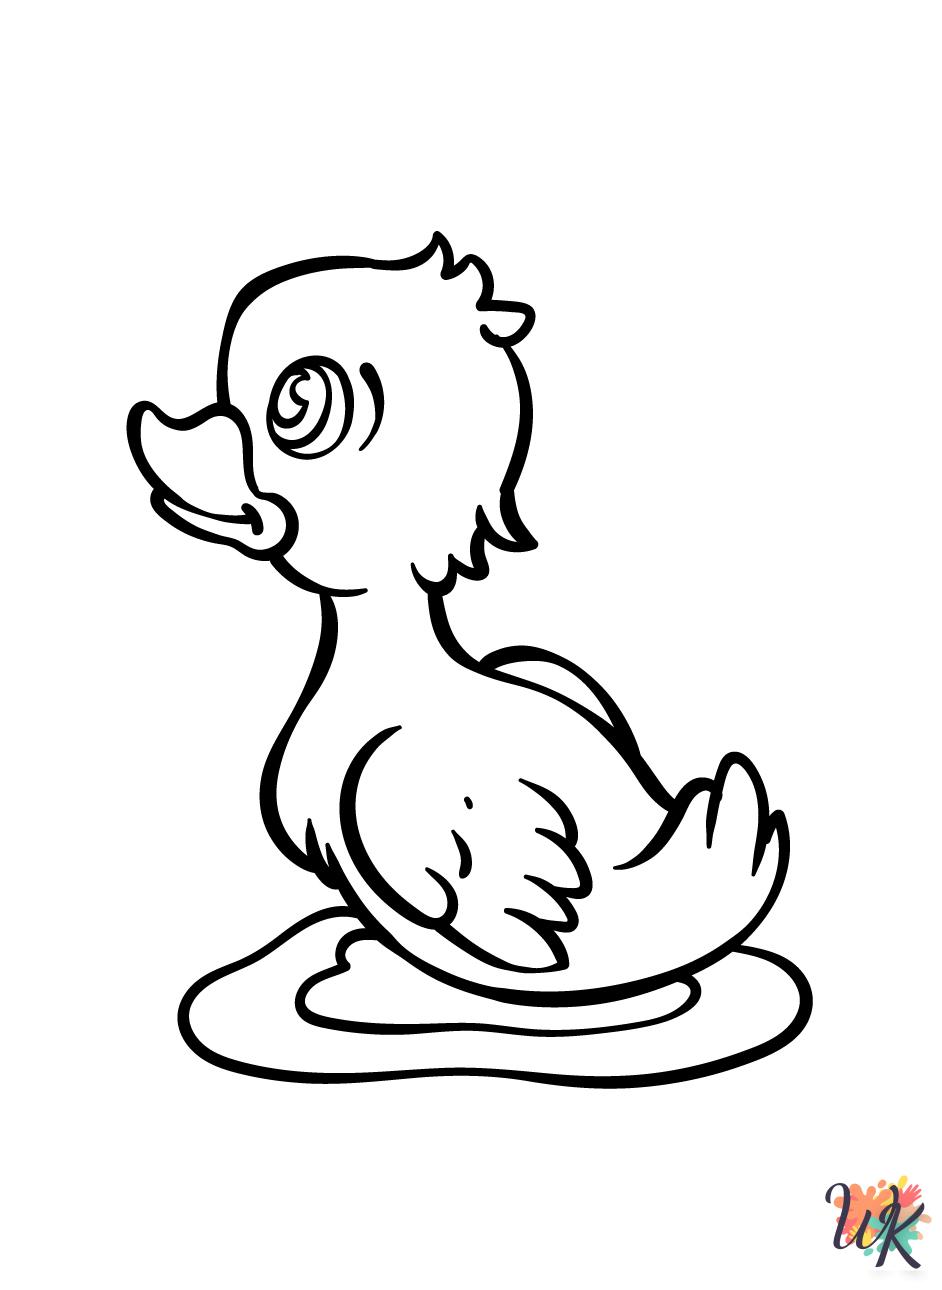 Ducks cards coloring pages